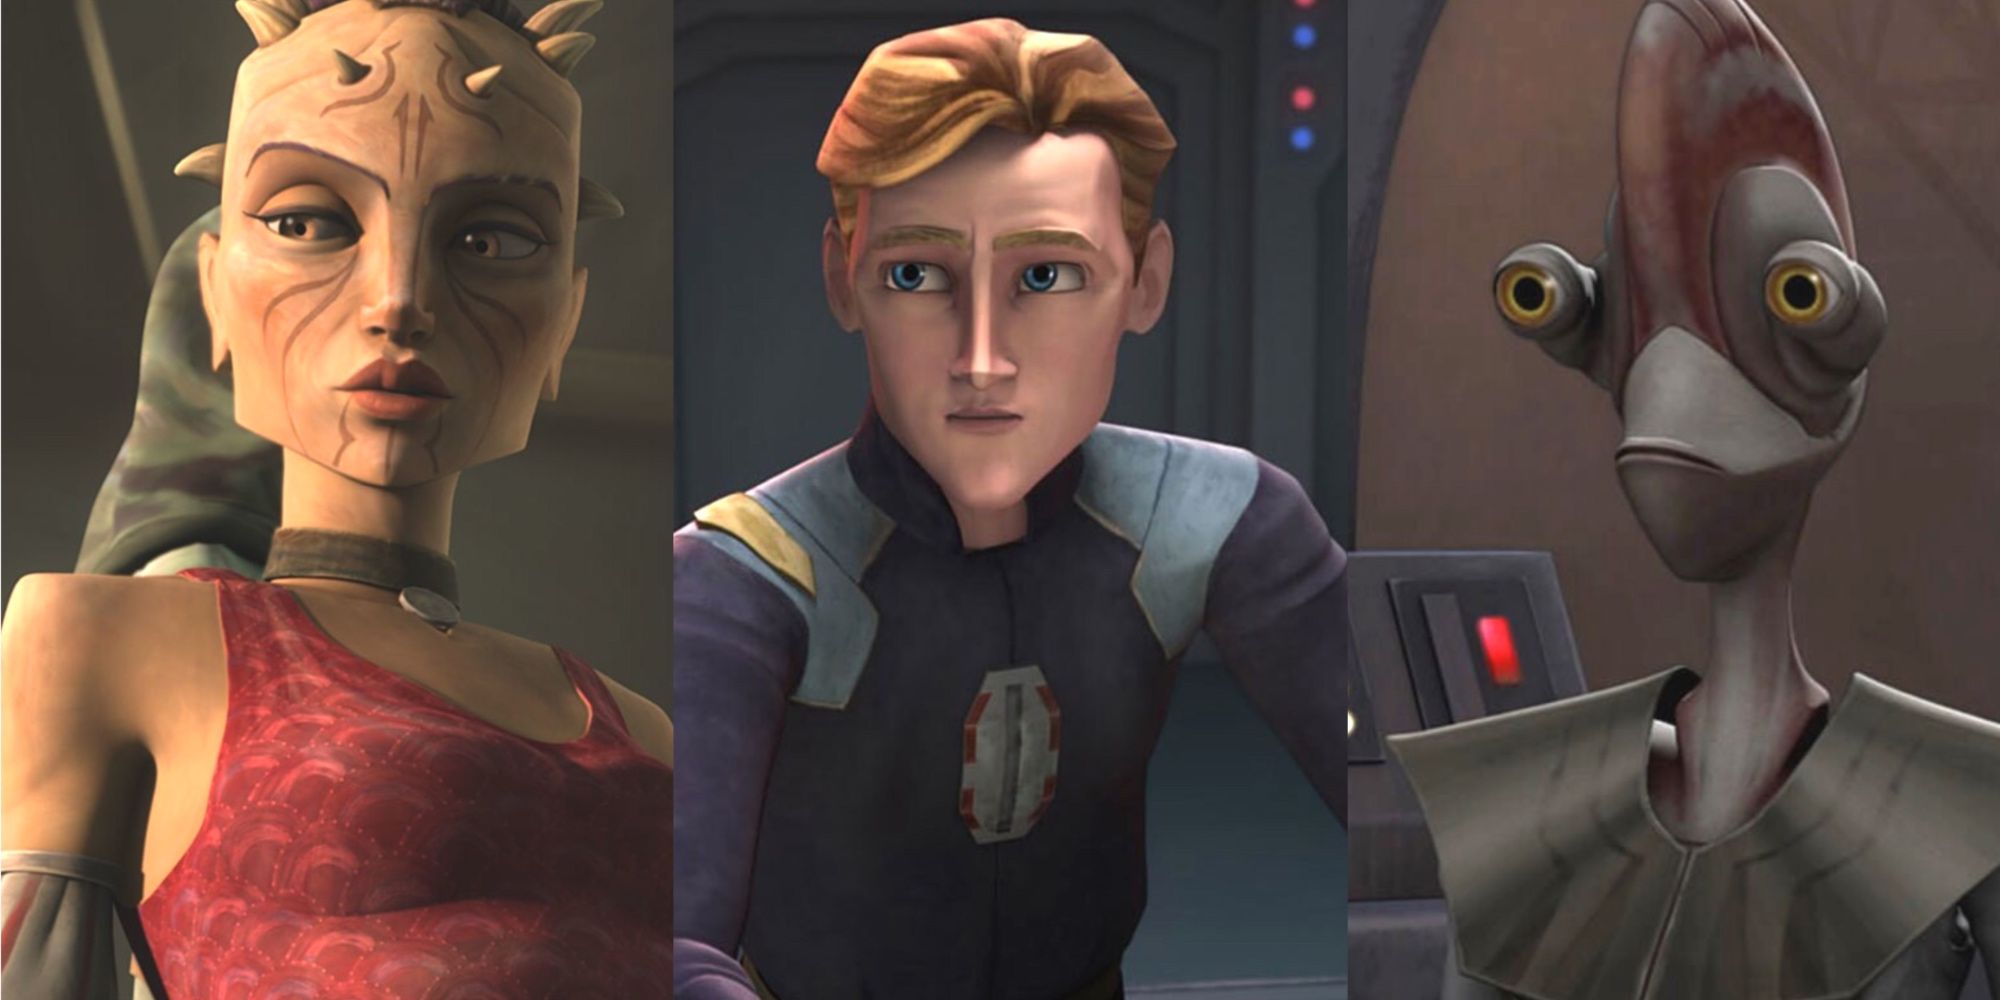 Screenshots of Sugi, Korkie and Sionver Boll from the Clone Wars series